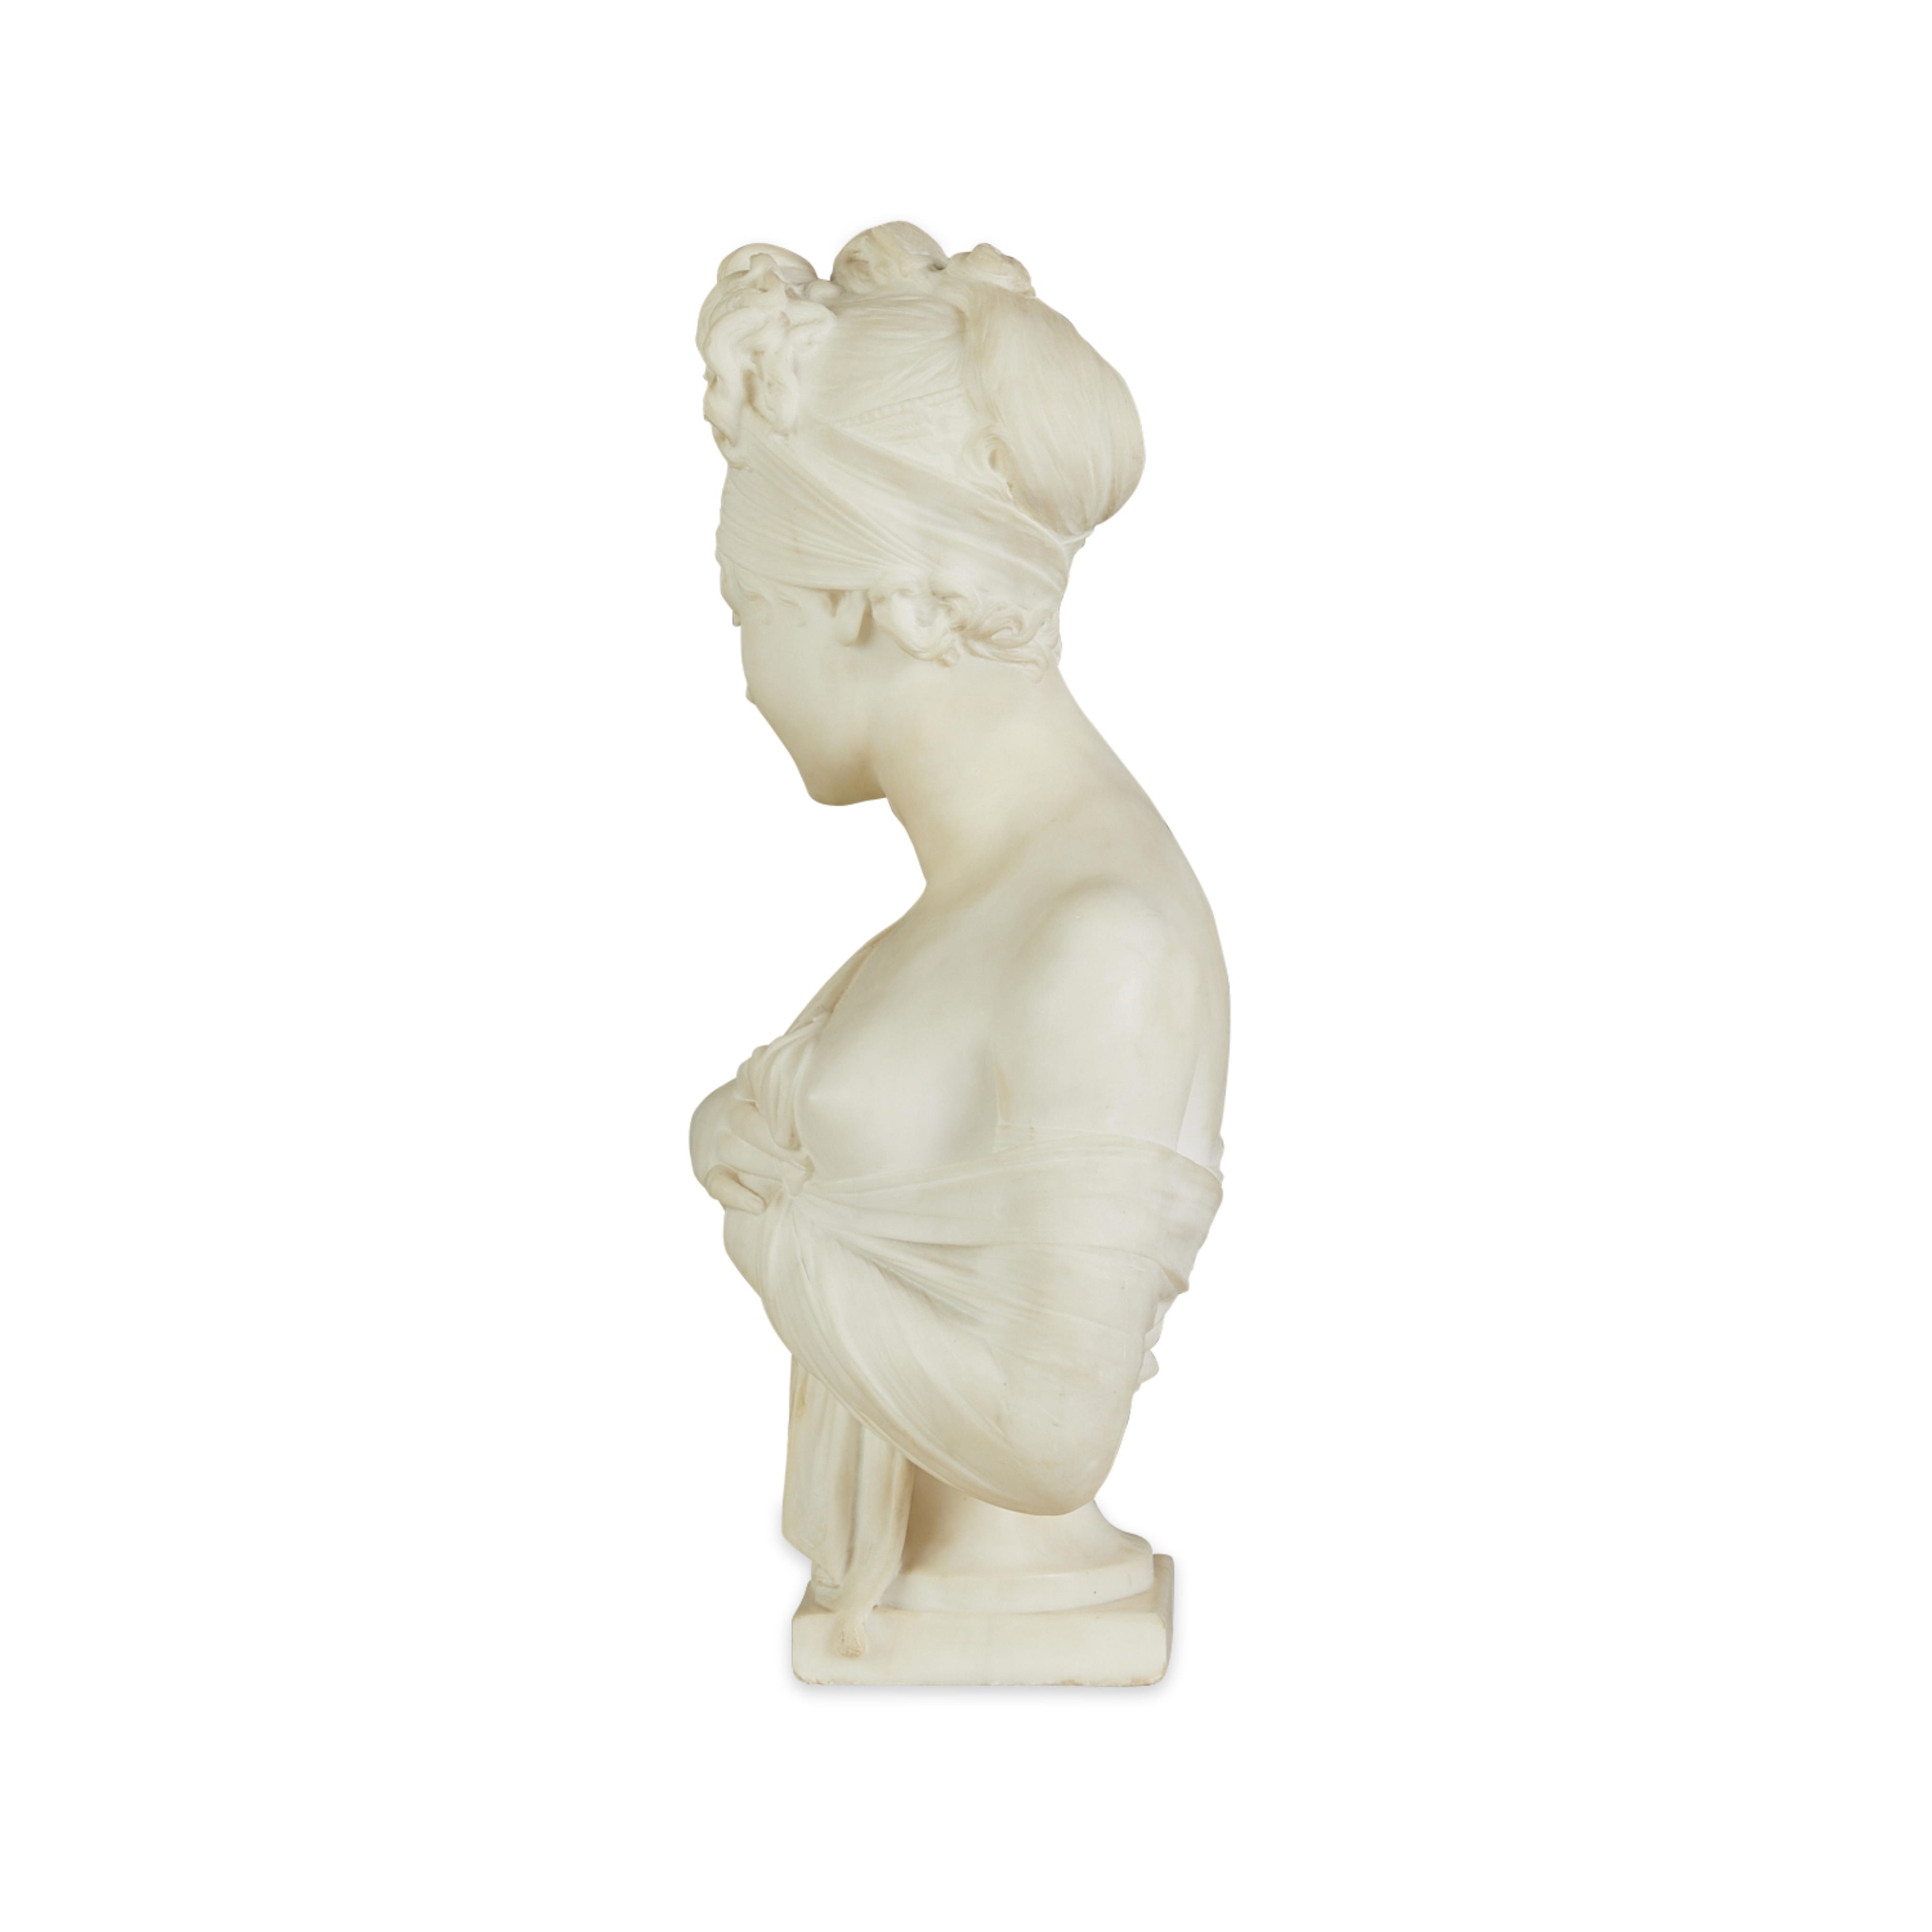 After Joseph Chinard "Madame Recamier" Marble Bust - Image 5 of 9